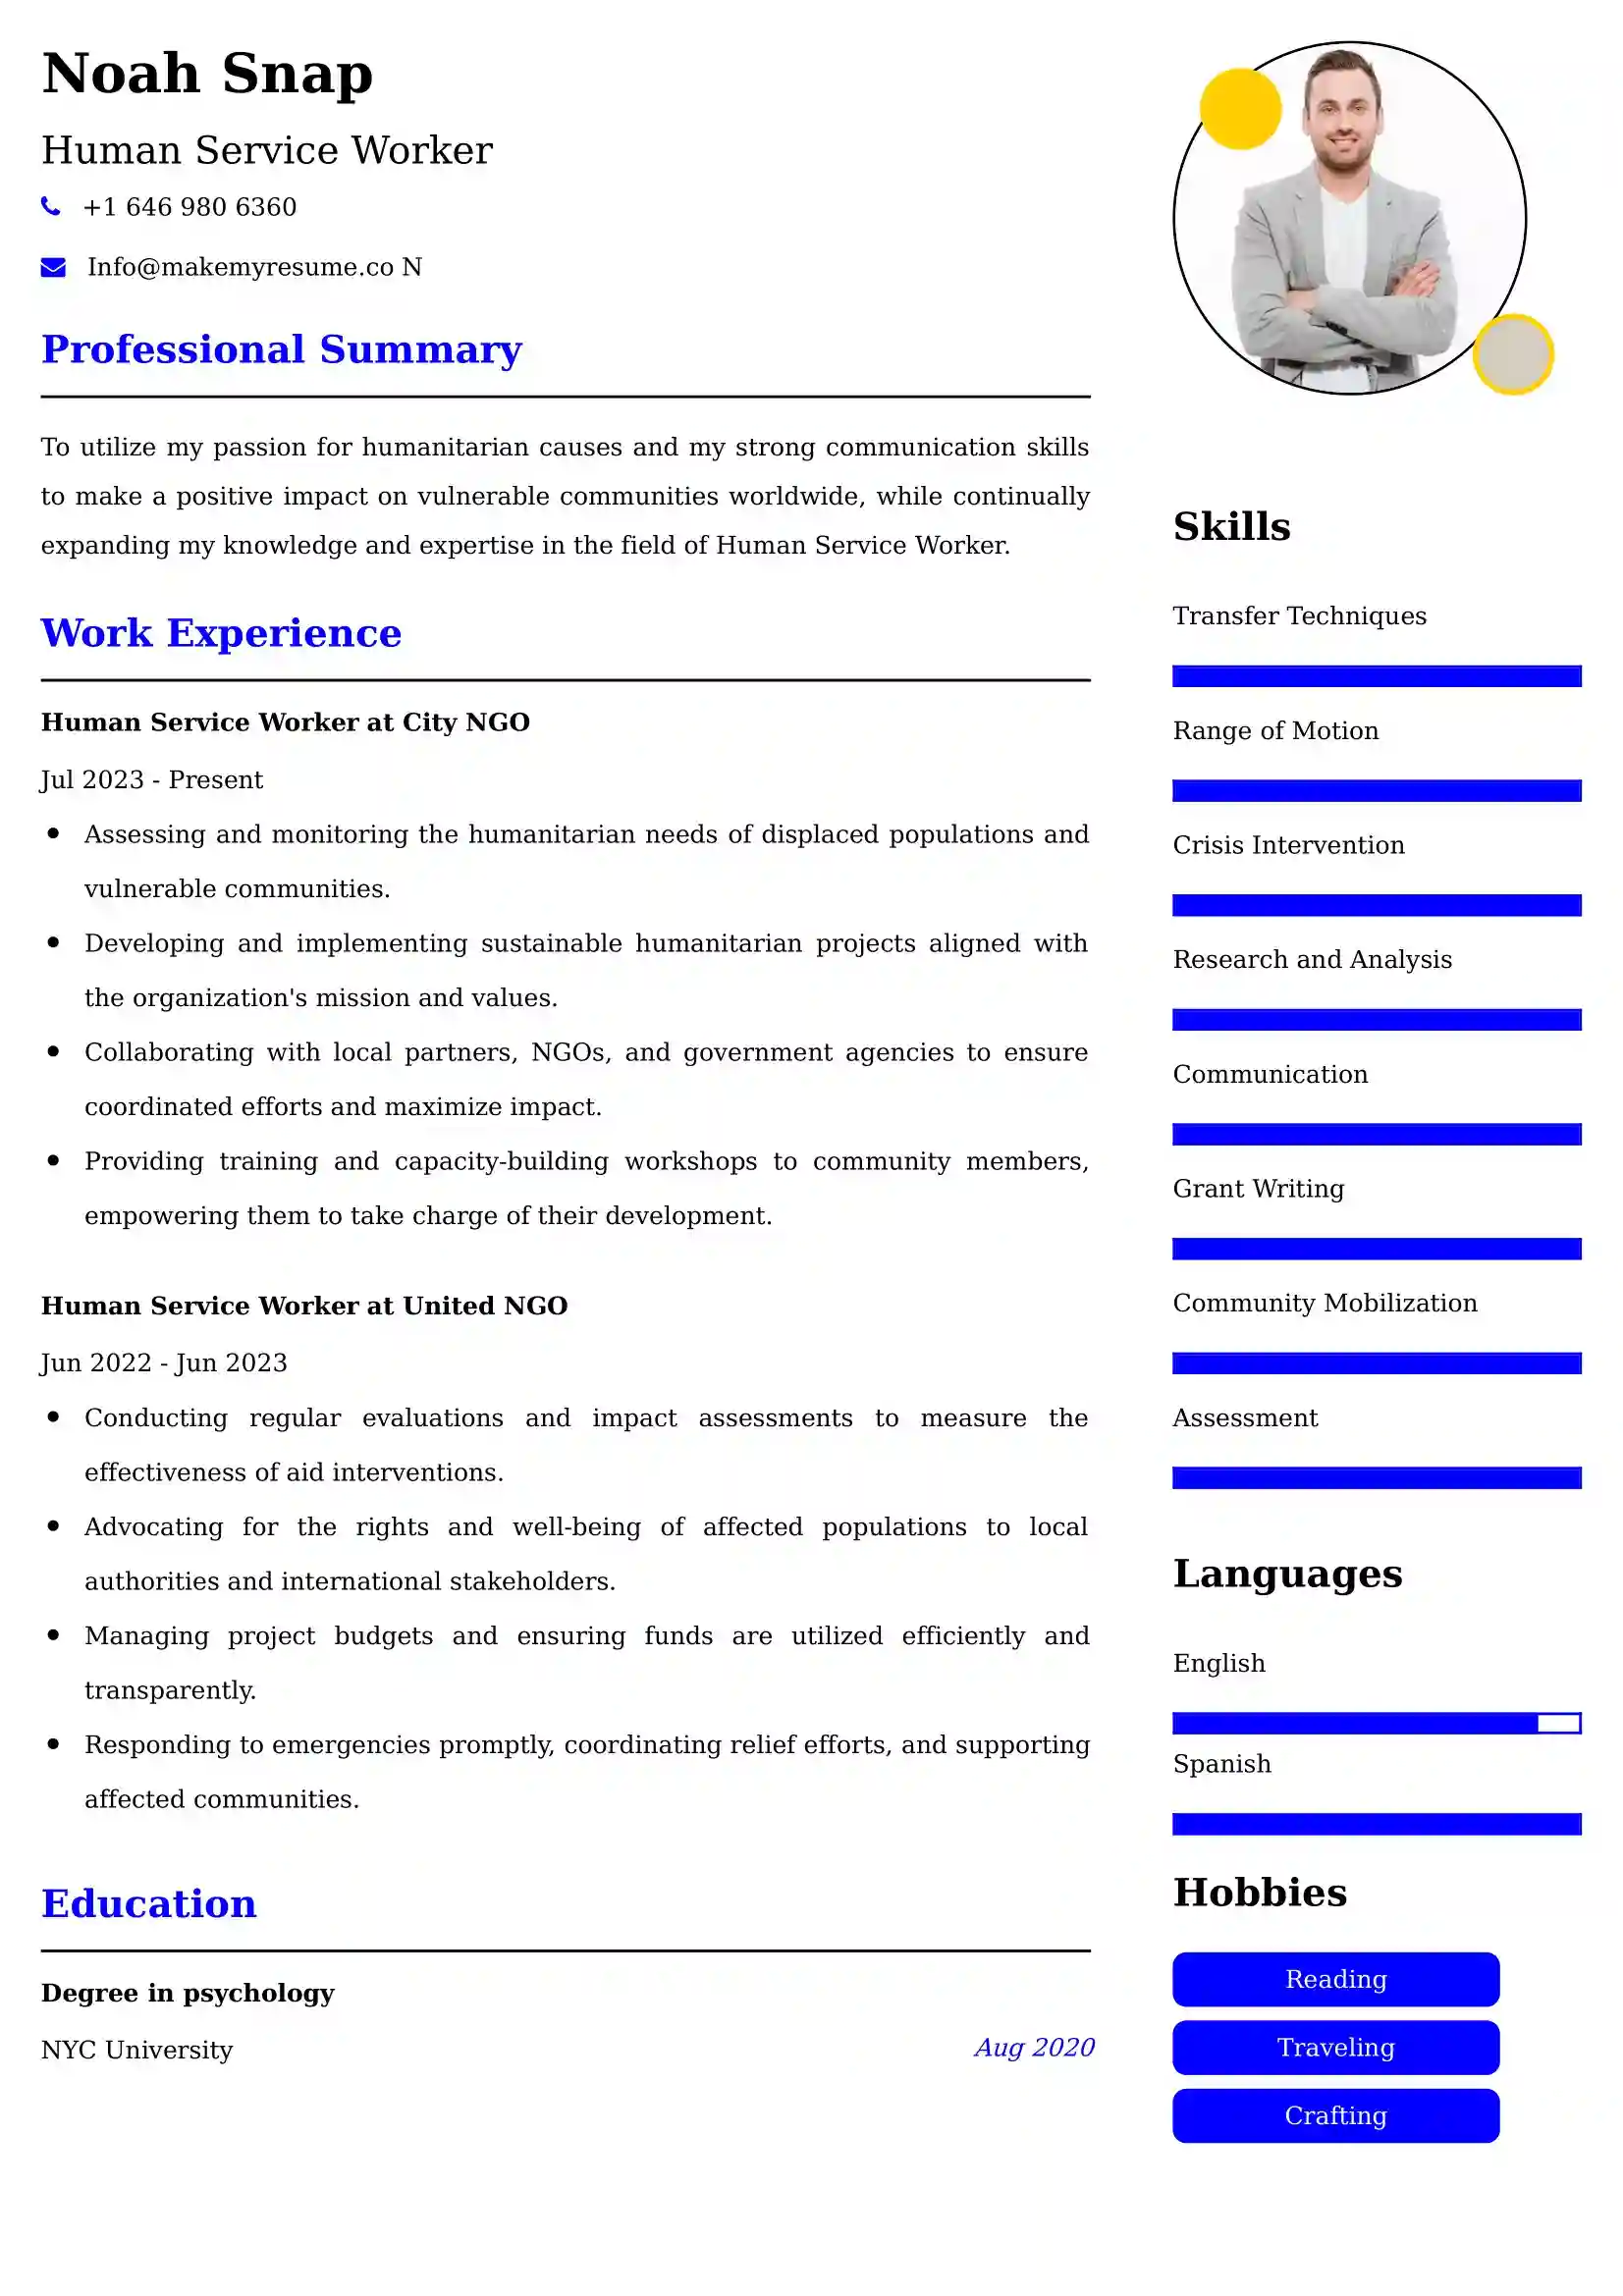 Best Human Service Worker Resume Examples for UK